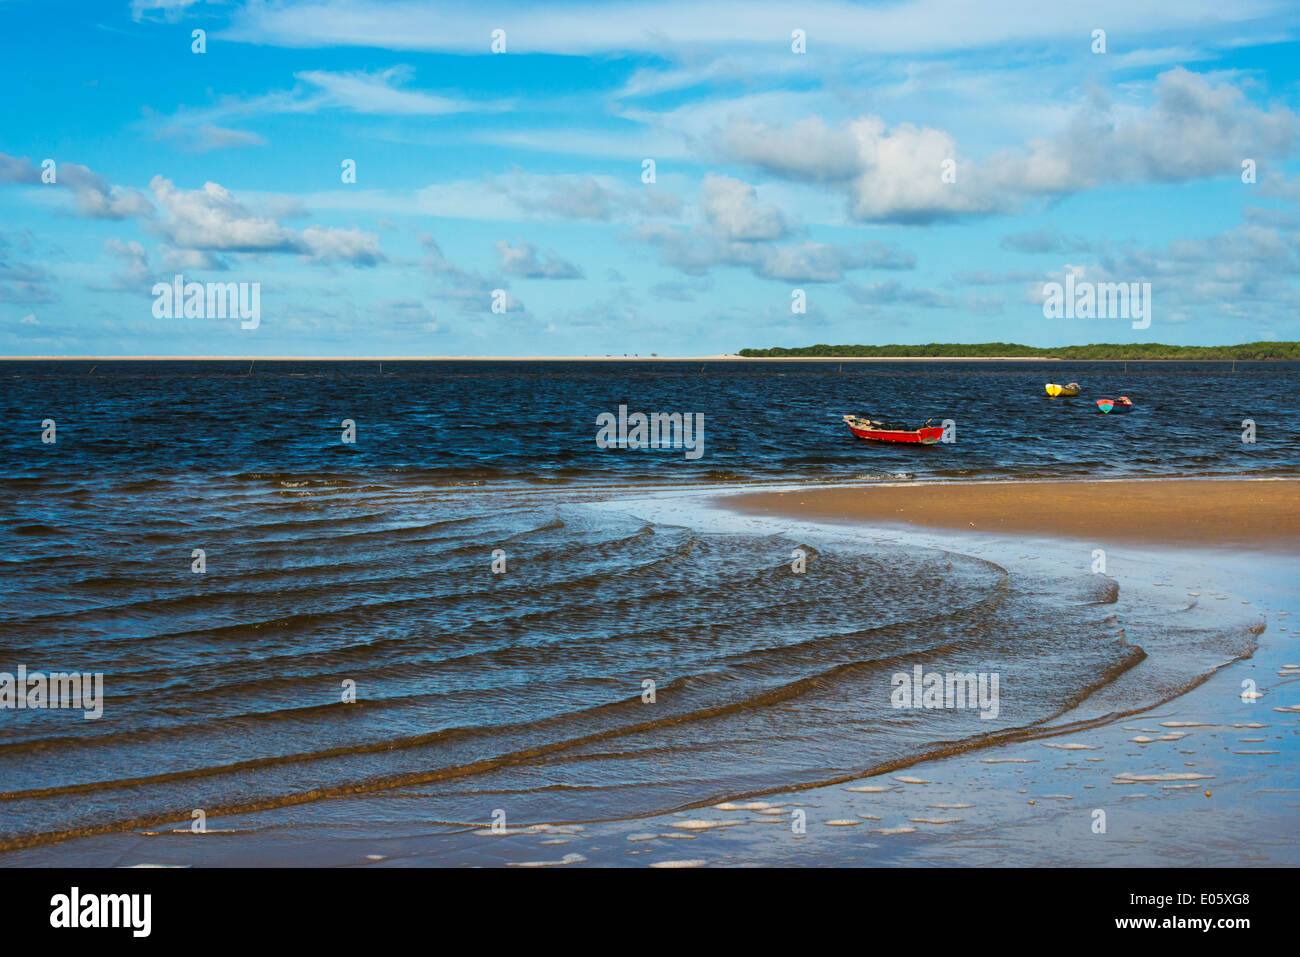 Boat on the beach along the Preguicas River, Atins, Maranhao State, Brazil Stock Photo